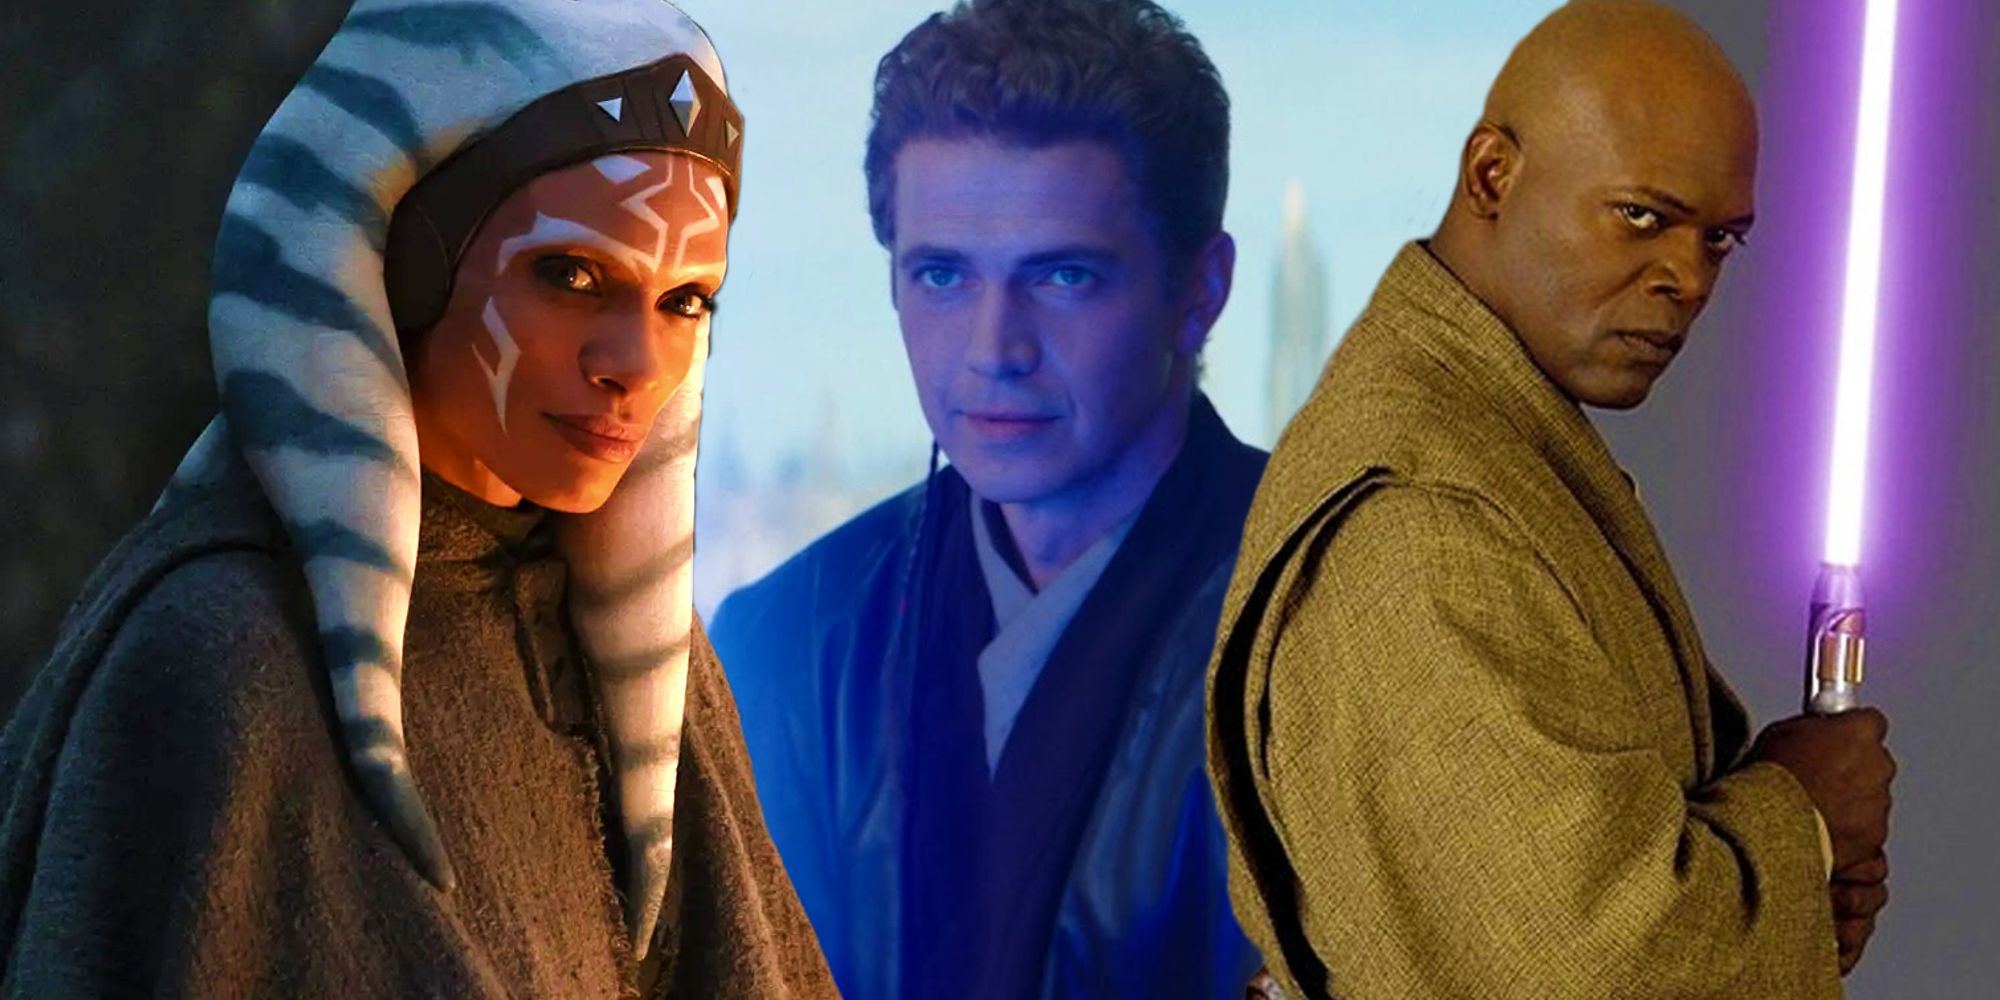 Anakin Skywalker Is Returning In Ahsoka – But Will Another Classic Star Wars Hero Too?